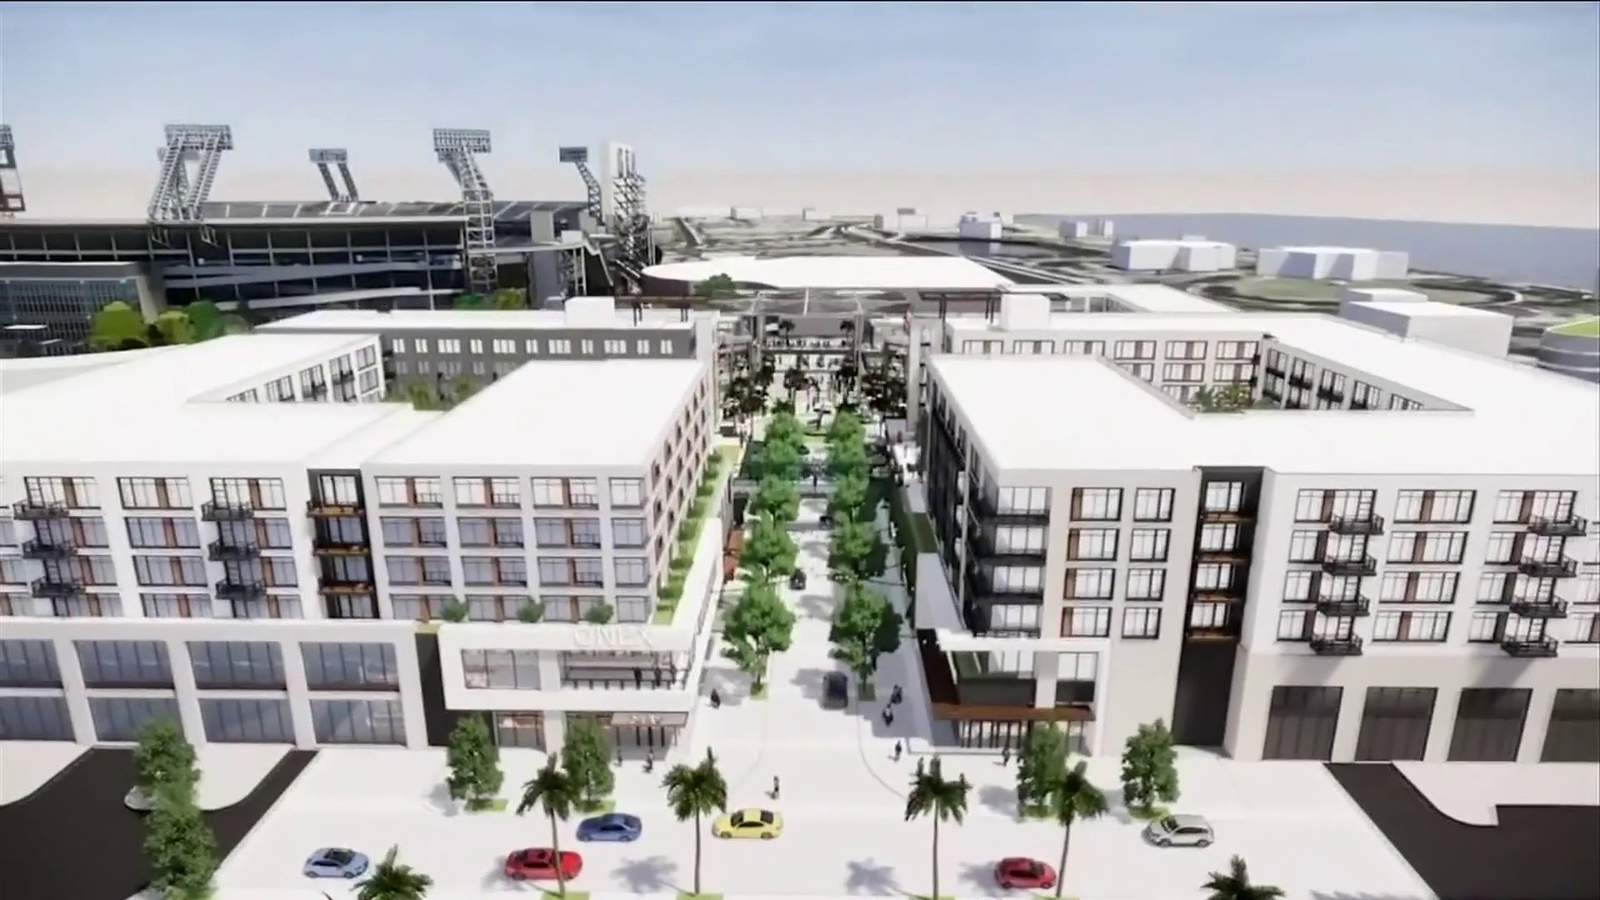 Lot J plans on hold, key element missing for $445 million project